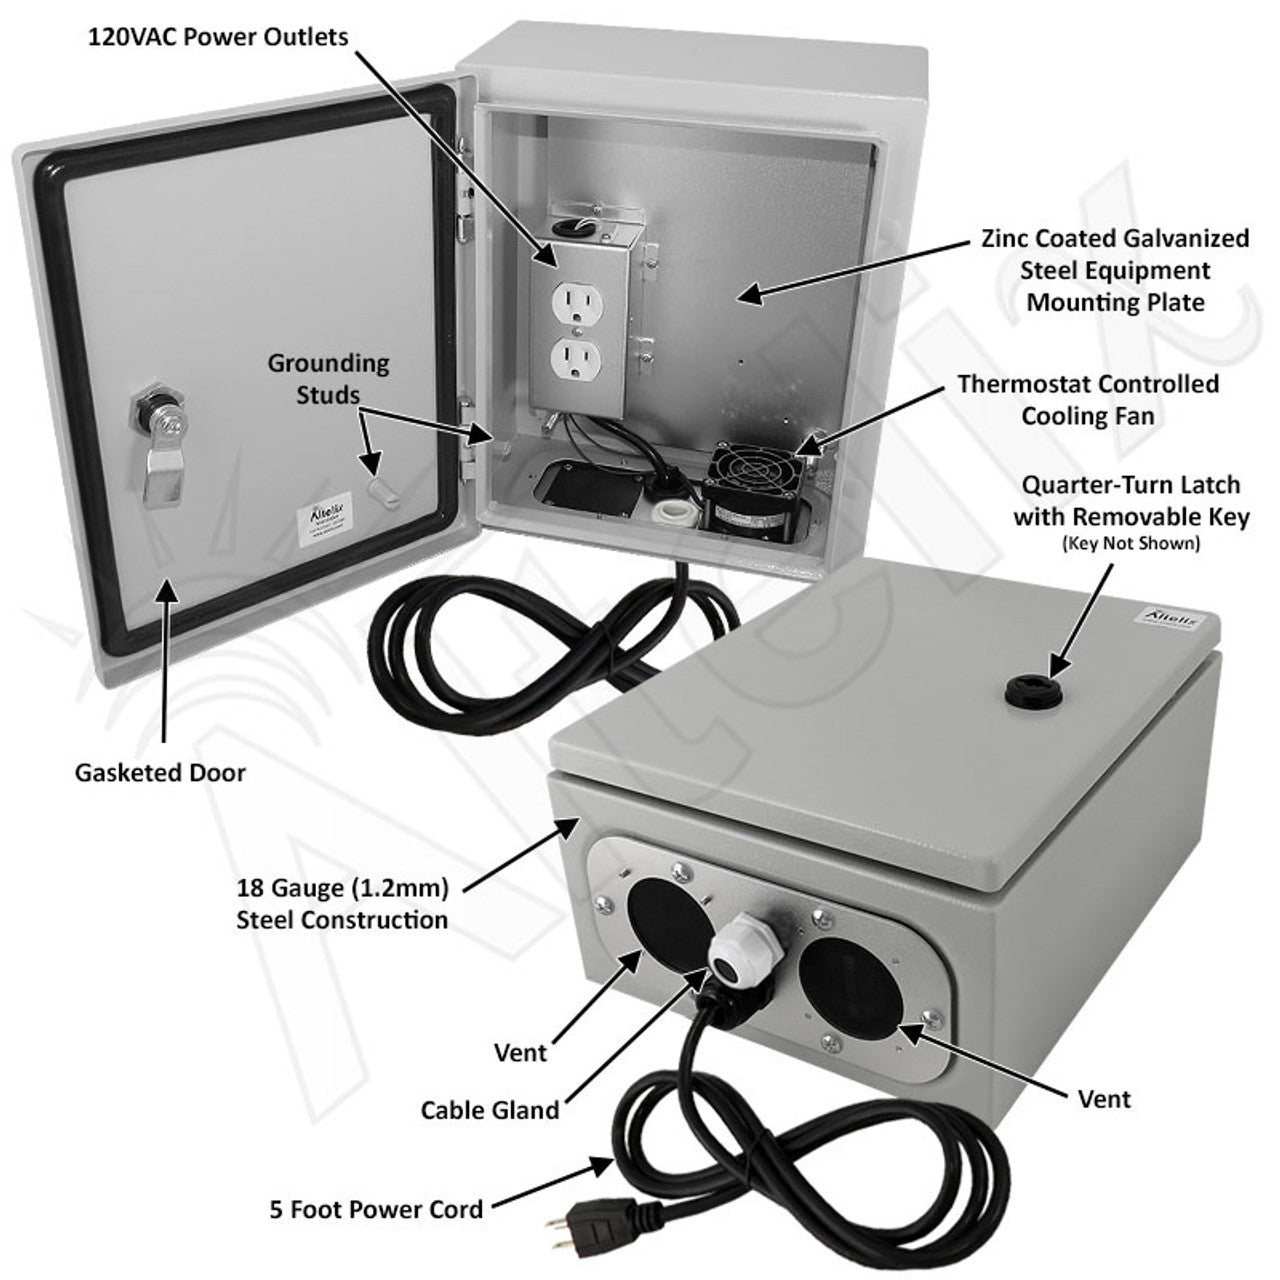 Altelix Steel Weatherproof NEMA Enclosure with Dual 120 VAC Duplex Outlets and Power Cord